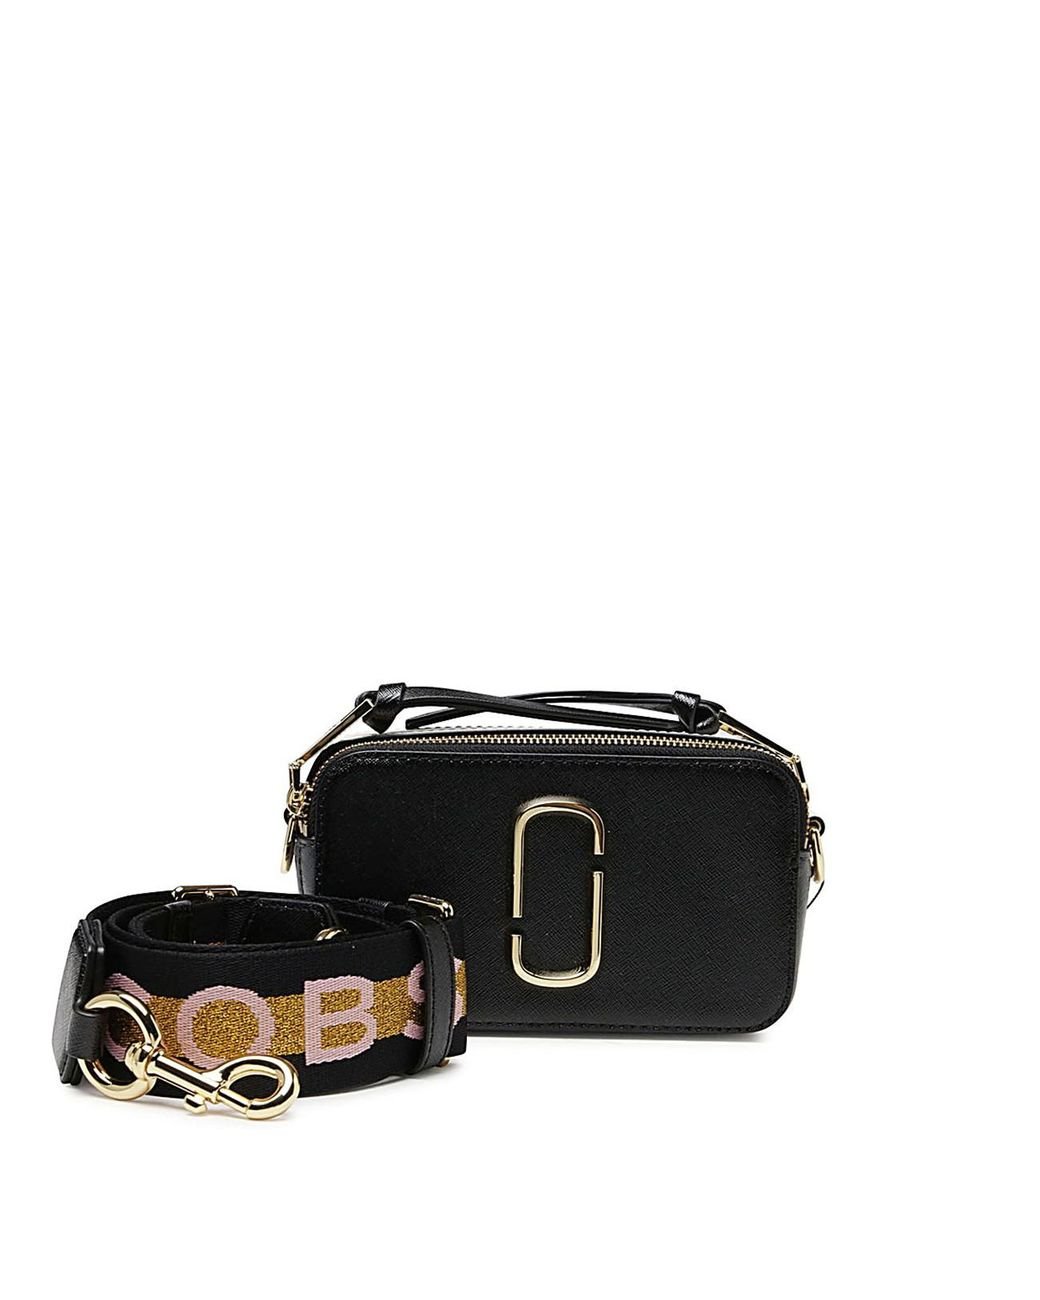 Marc Jacobs The Snapshot Camera Bag Rose/Multi in Leather with Gold-tone -  US